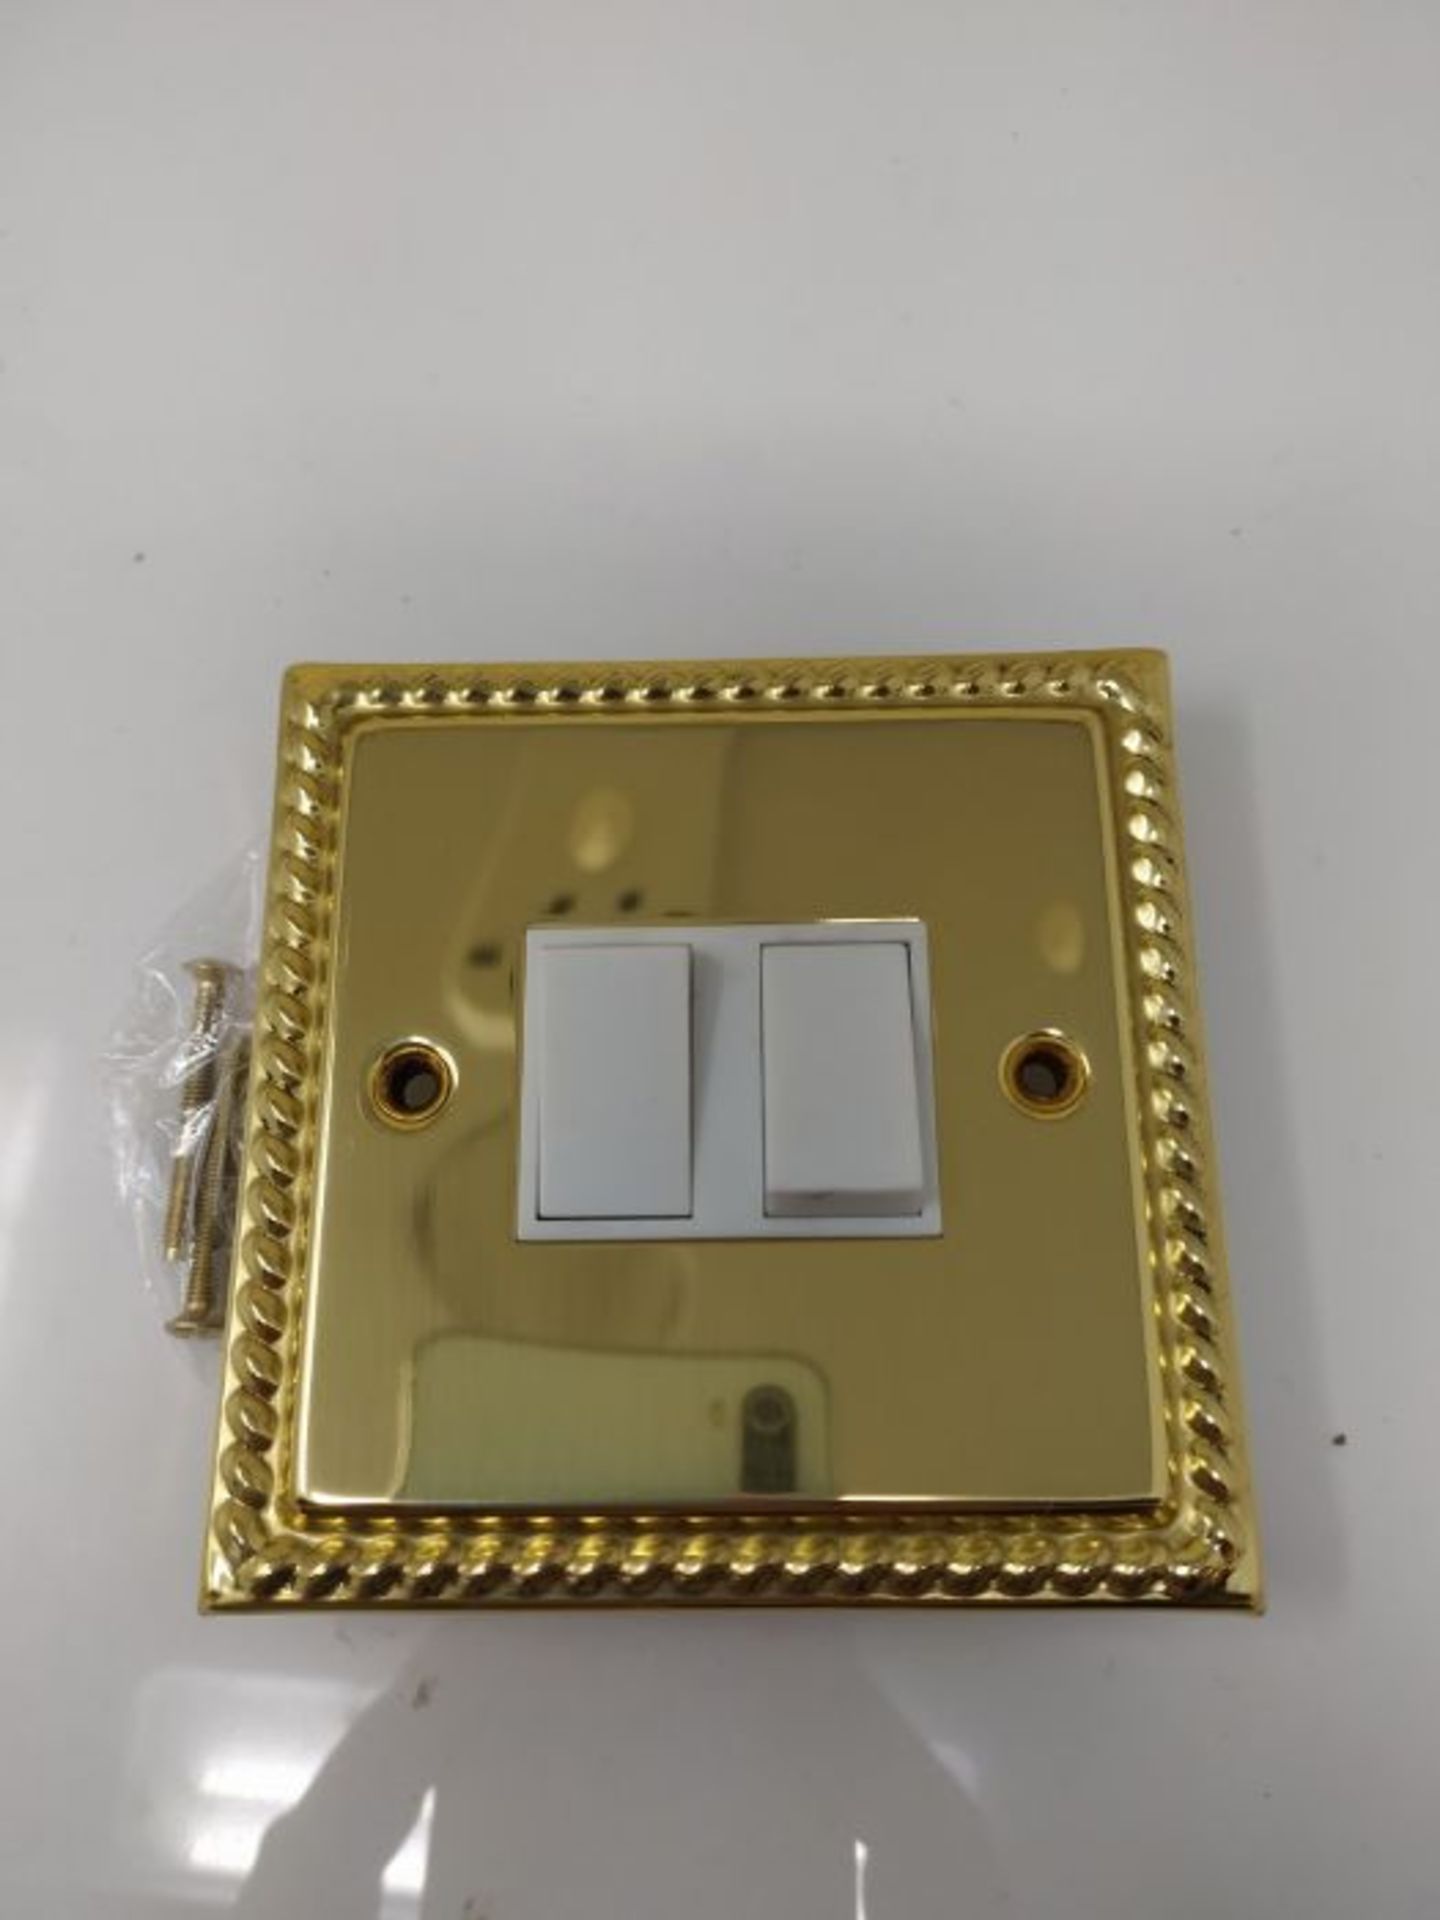 Light Switch 2 Gang - Polished Brass Georgian - White Insert Plastic Switch - 10 Amp D - Image 2 of 2